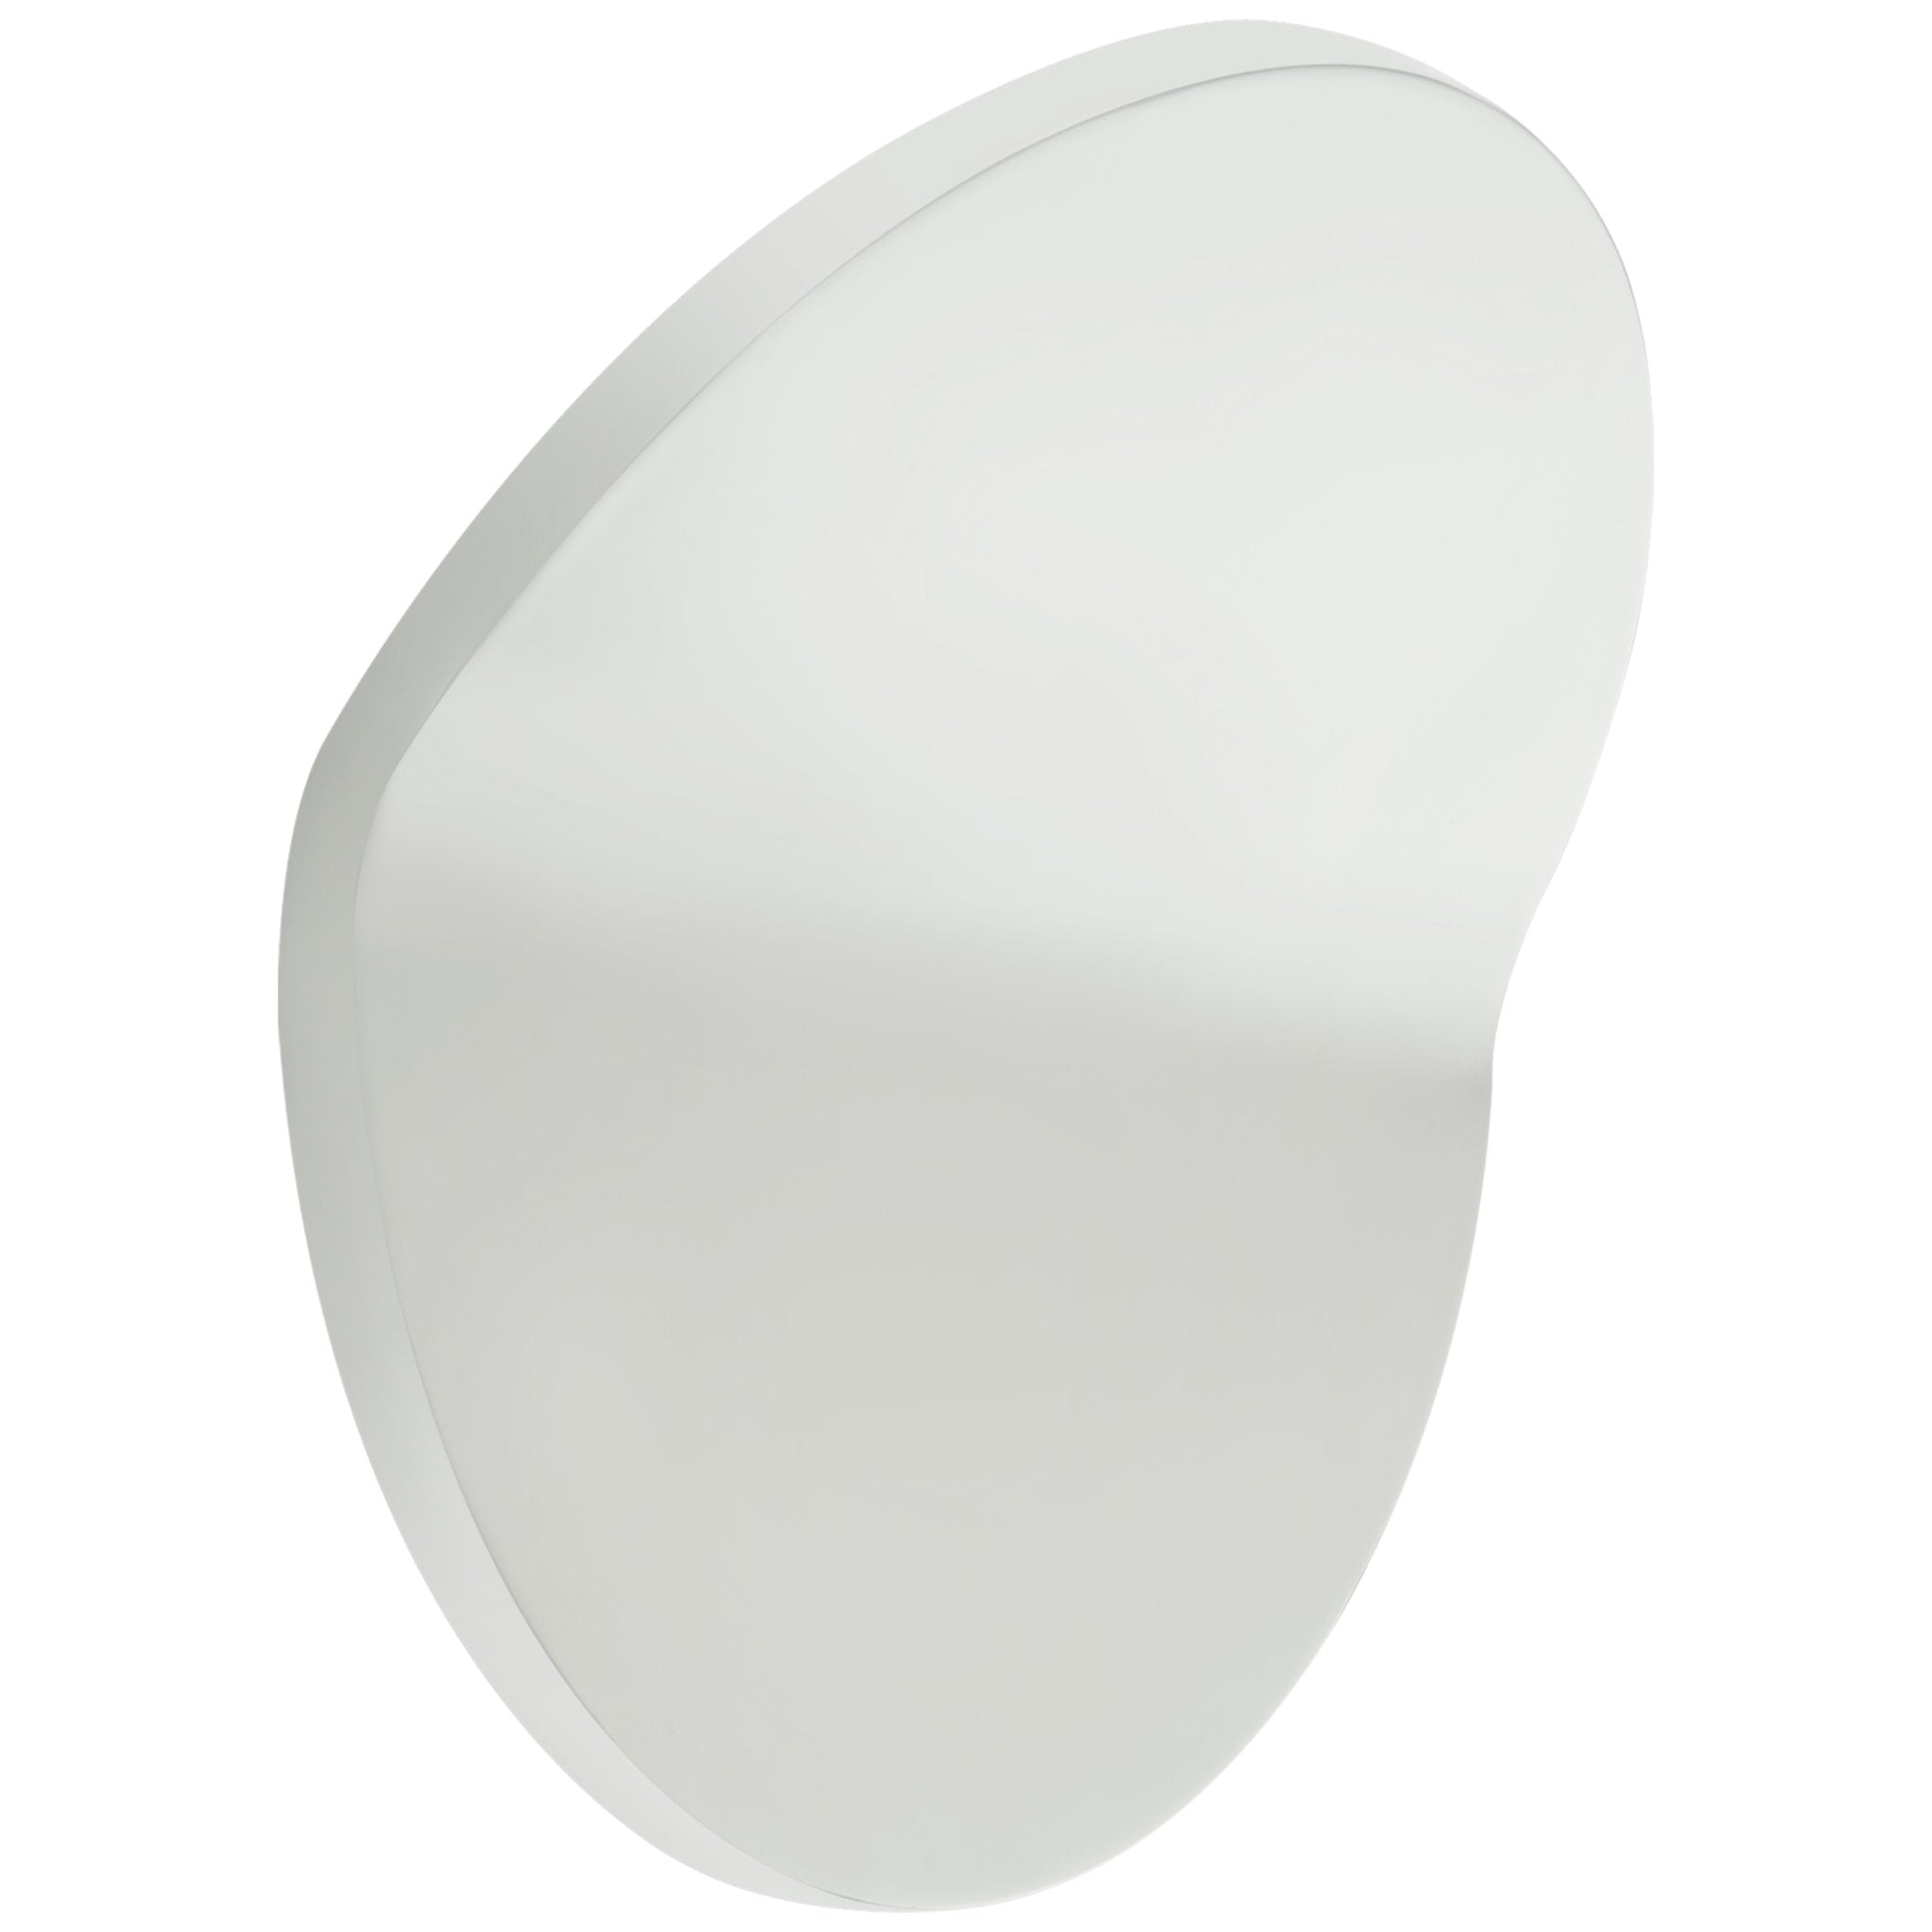 Peter Bristol Bend Large Round Light in White